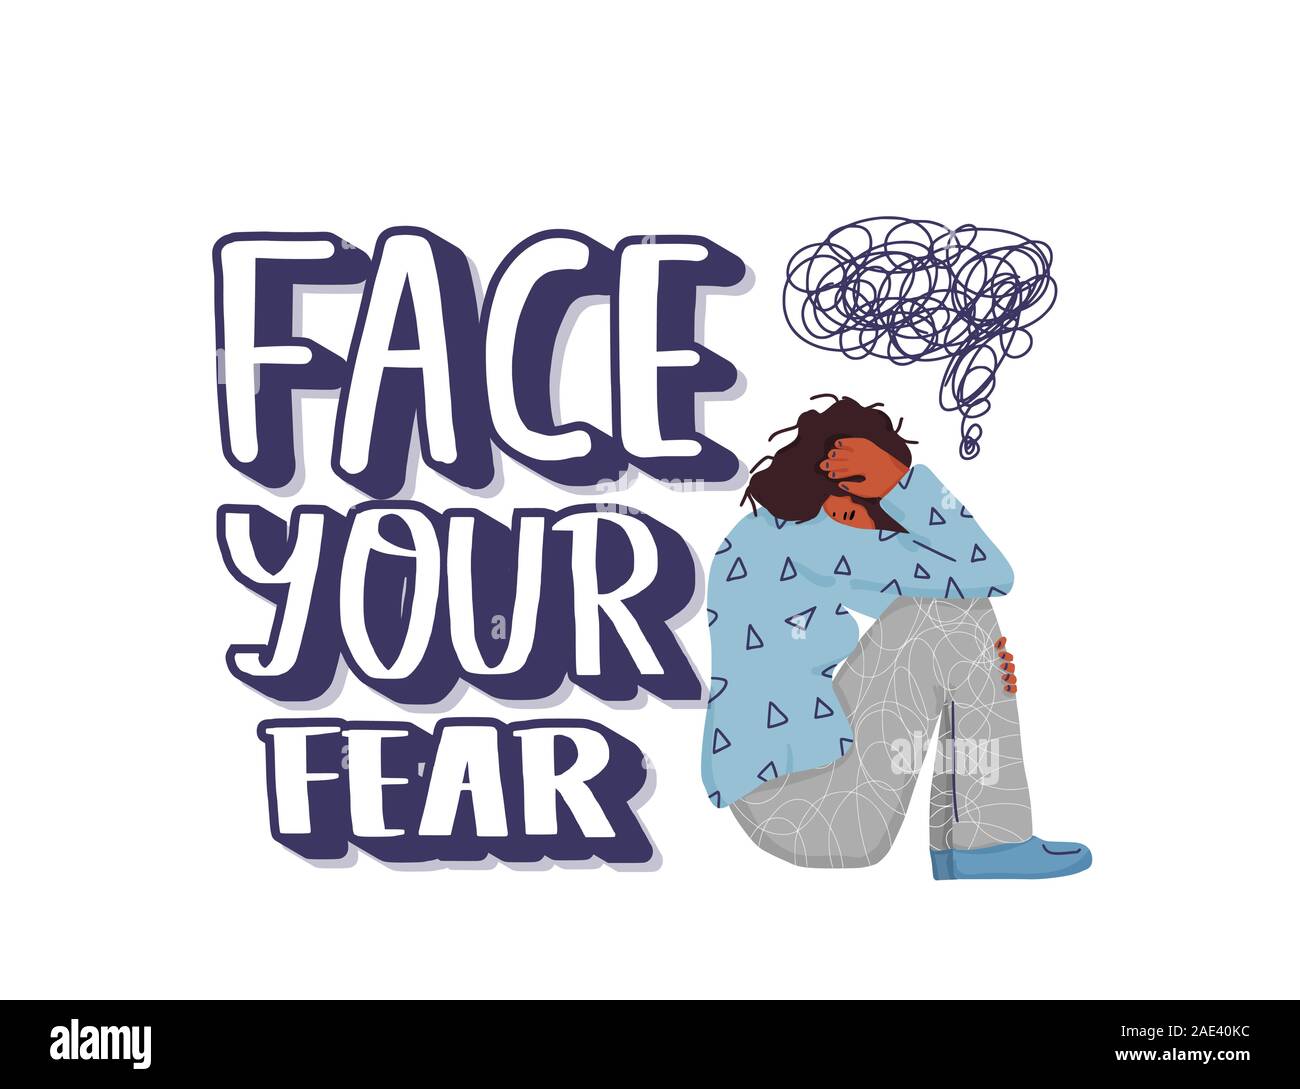 Face your fear slogan. Psychological problems concept. Young woman sitting on the floor with phobia and hand drawn text solated on white background. V Stock Vector